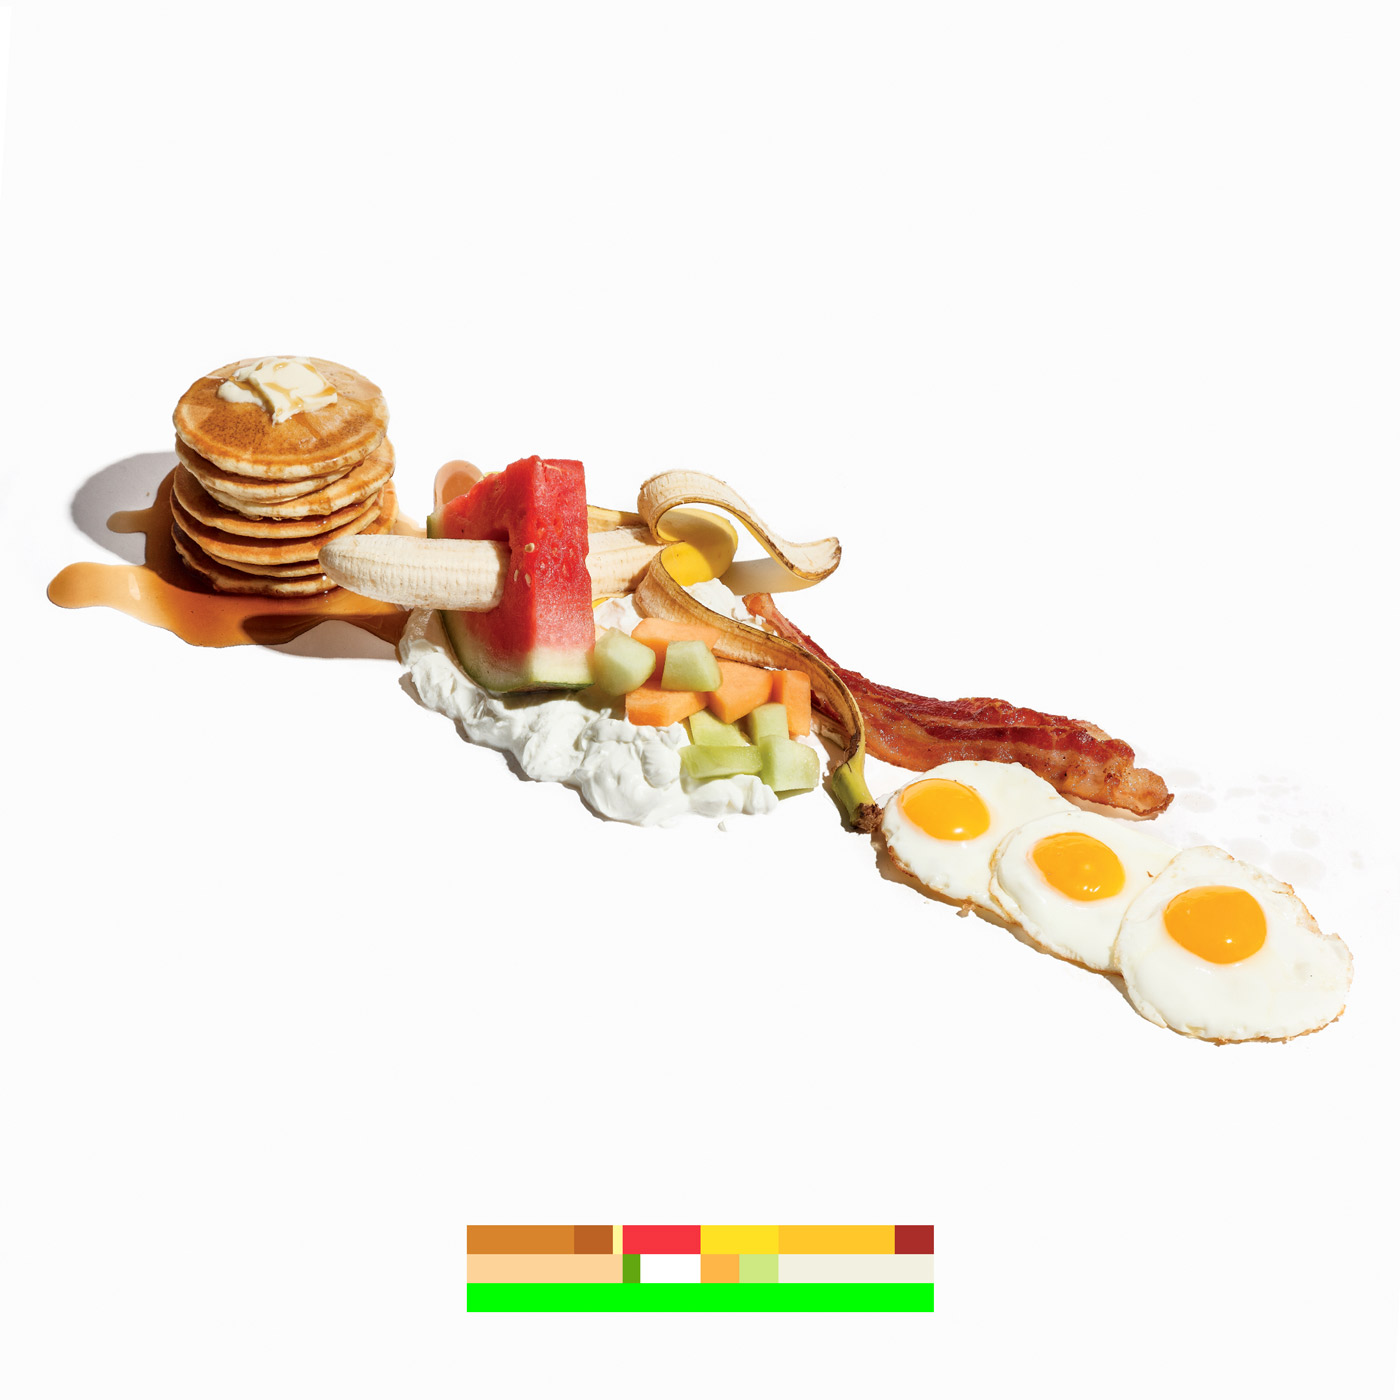 Art for The Yabba by Battles